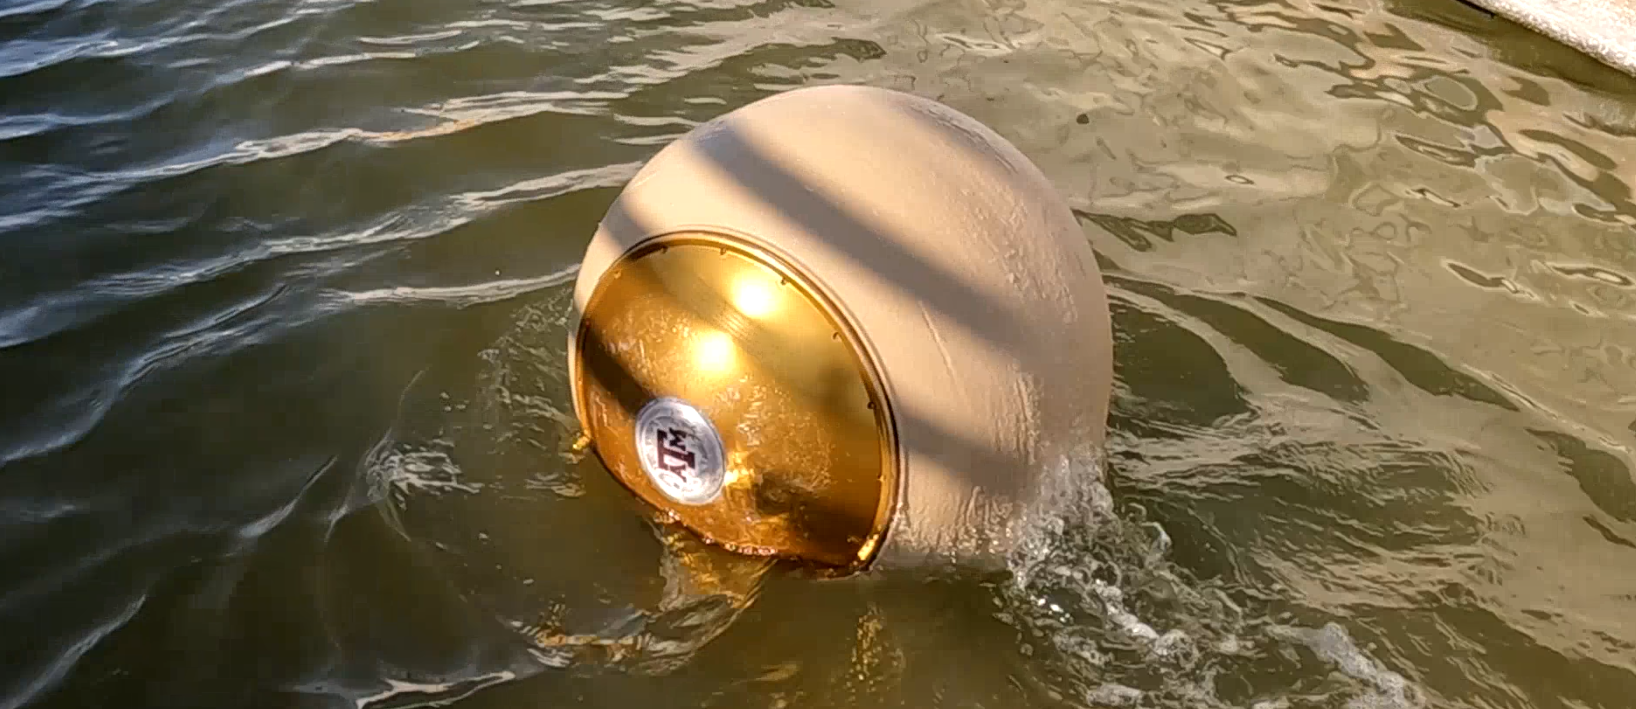 A spherical ball robot, Roboball, operating in water. The ball is floating on the surface and has a trail indicating forward motion.